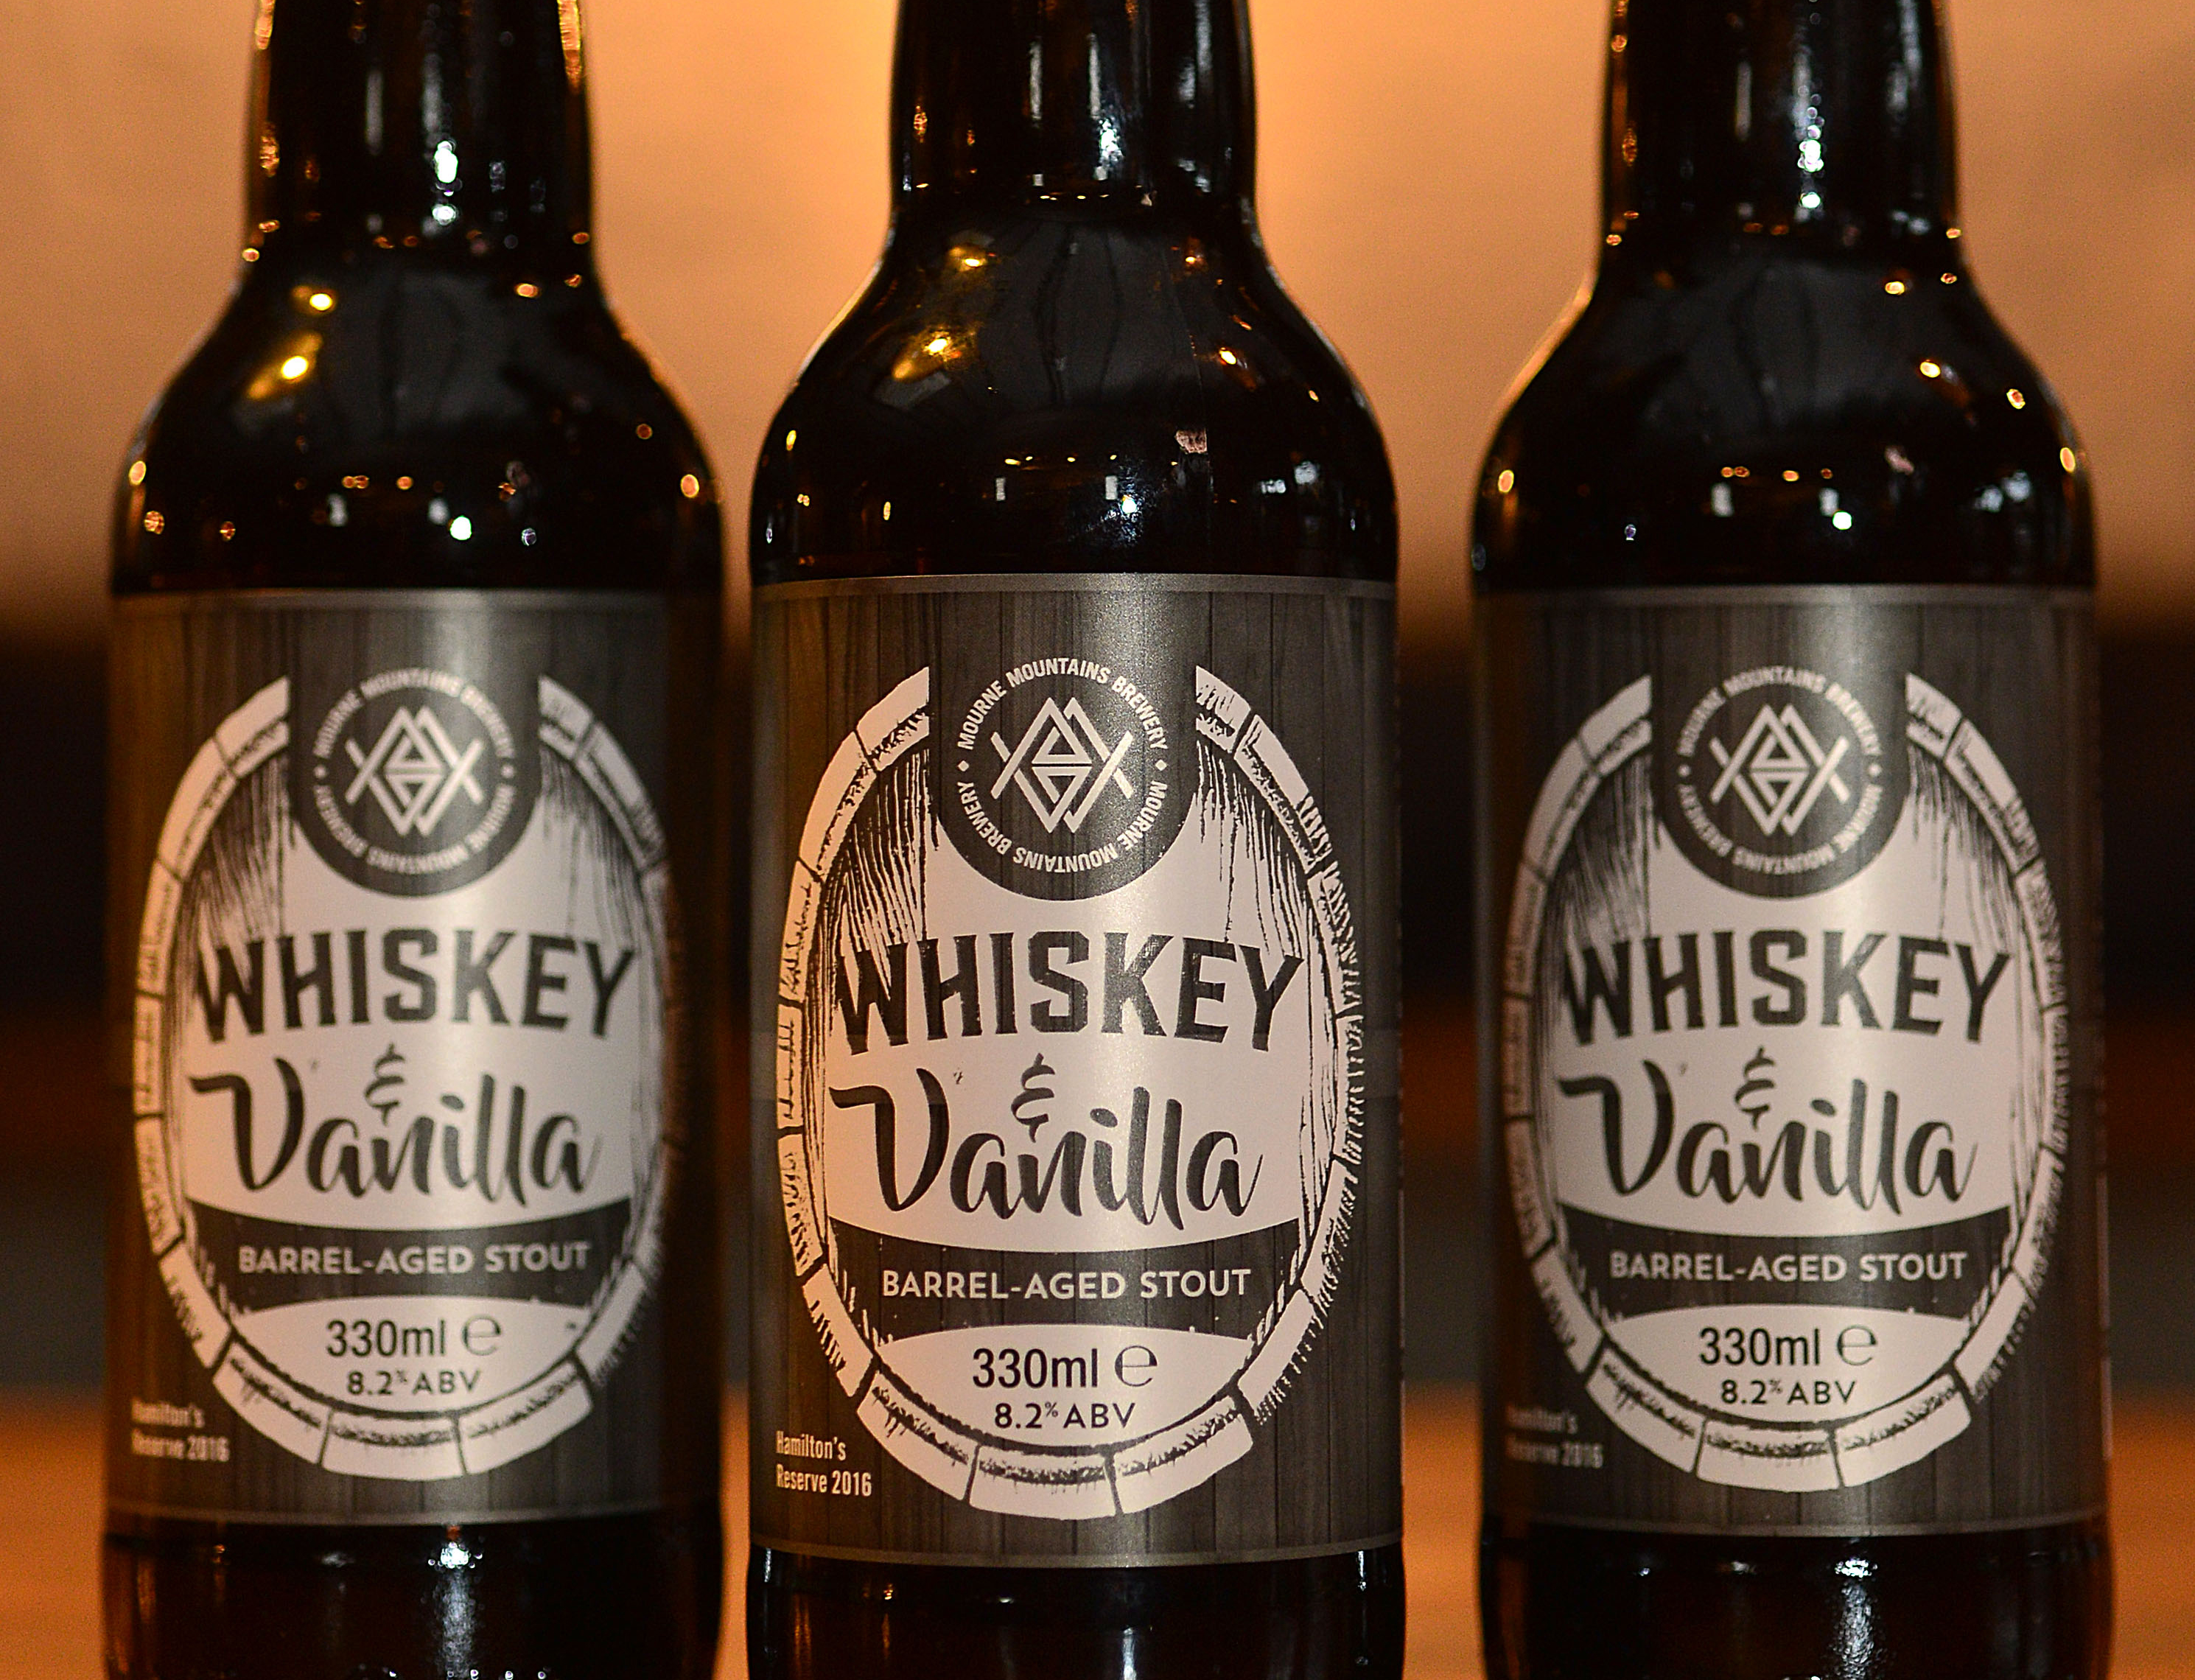 Co. Down brewery launches special whiskey and vanilla barrel-aged stout